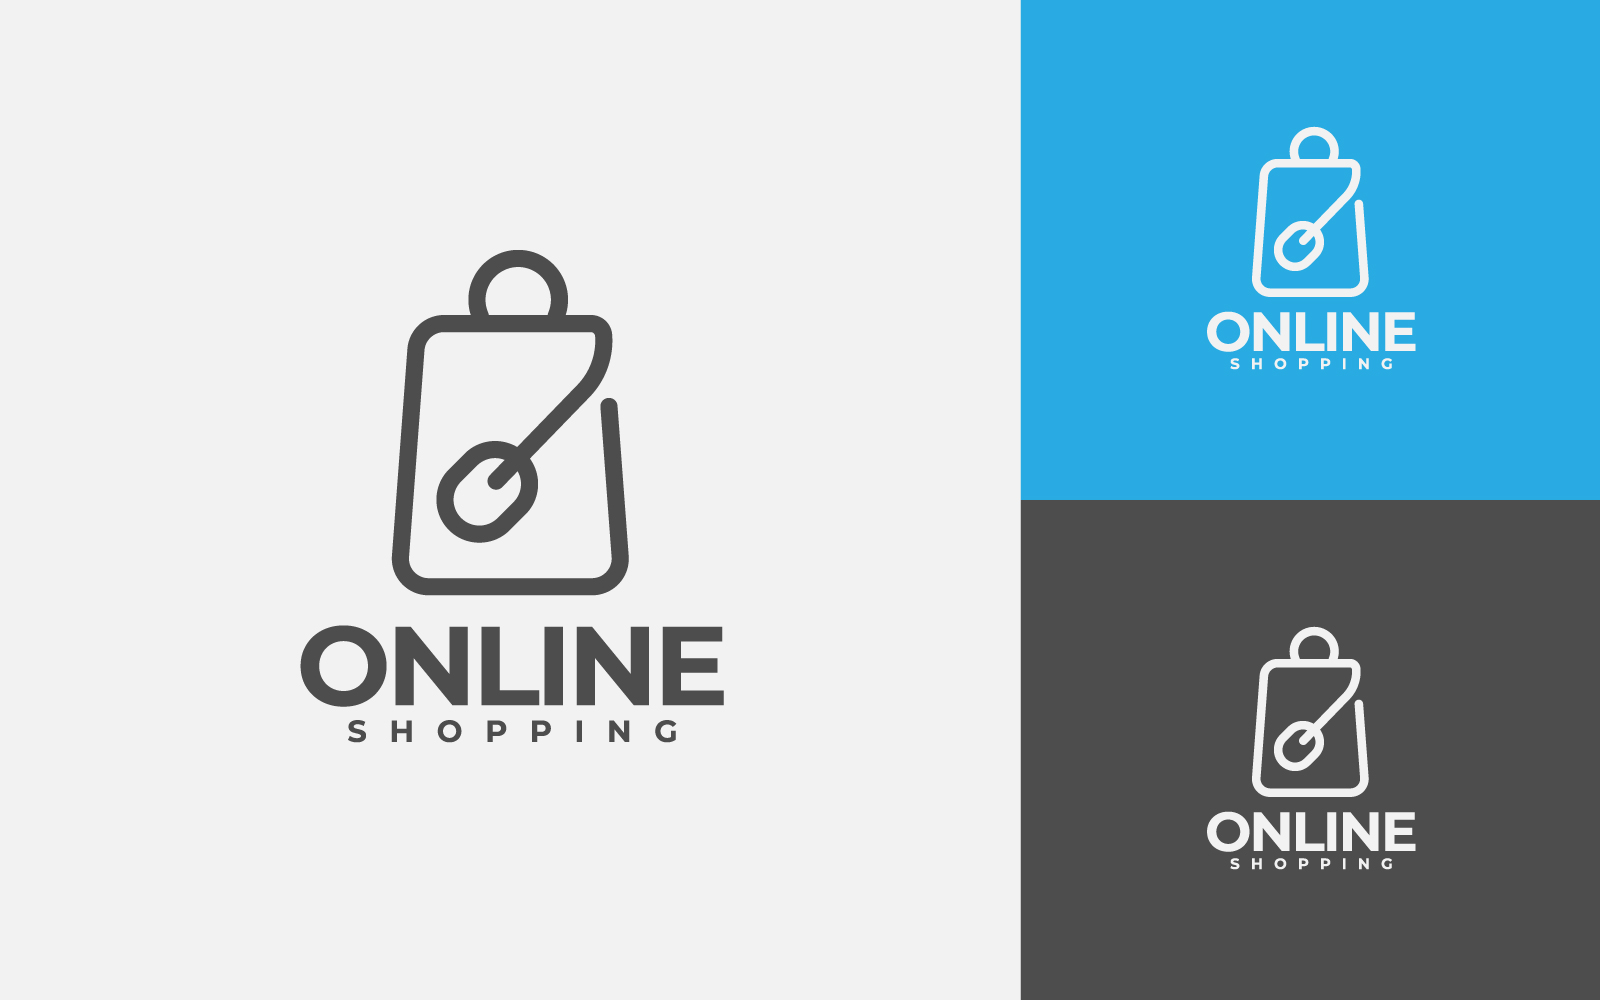 Online Shopping Logo Design Template. Simple And Minimal Style For E-Commerce Web Or Business.